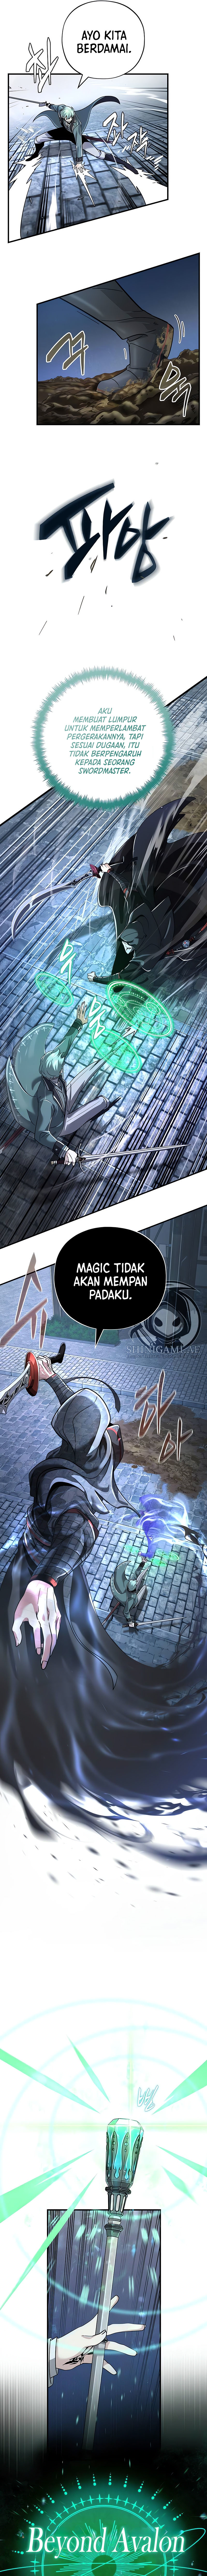 the-dark-magician-transmigrates-after-66666-years Chapter 103